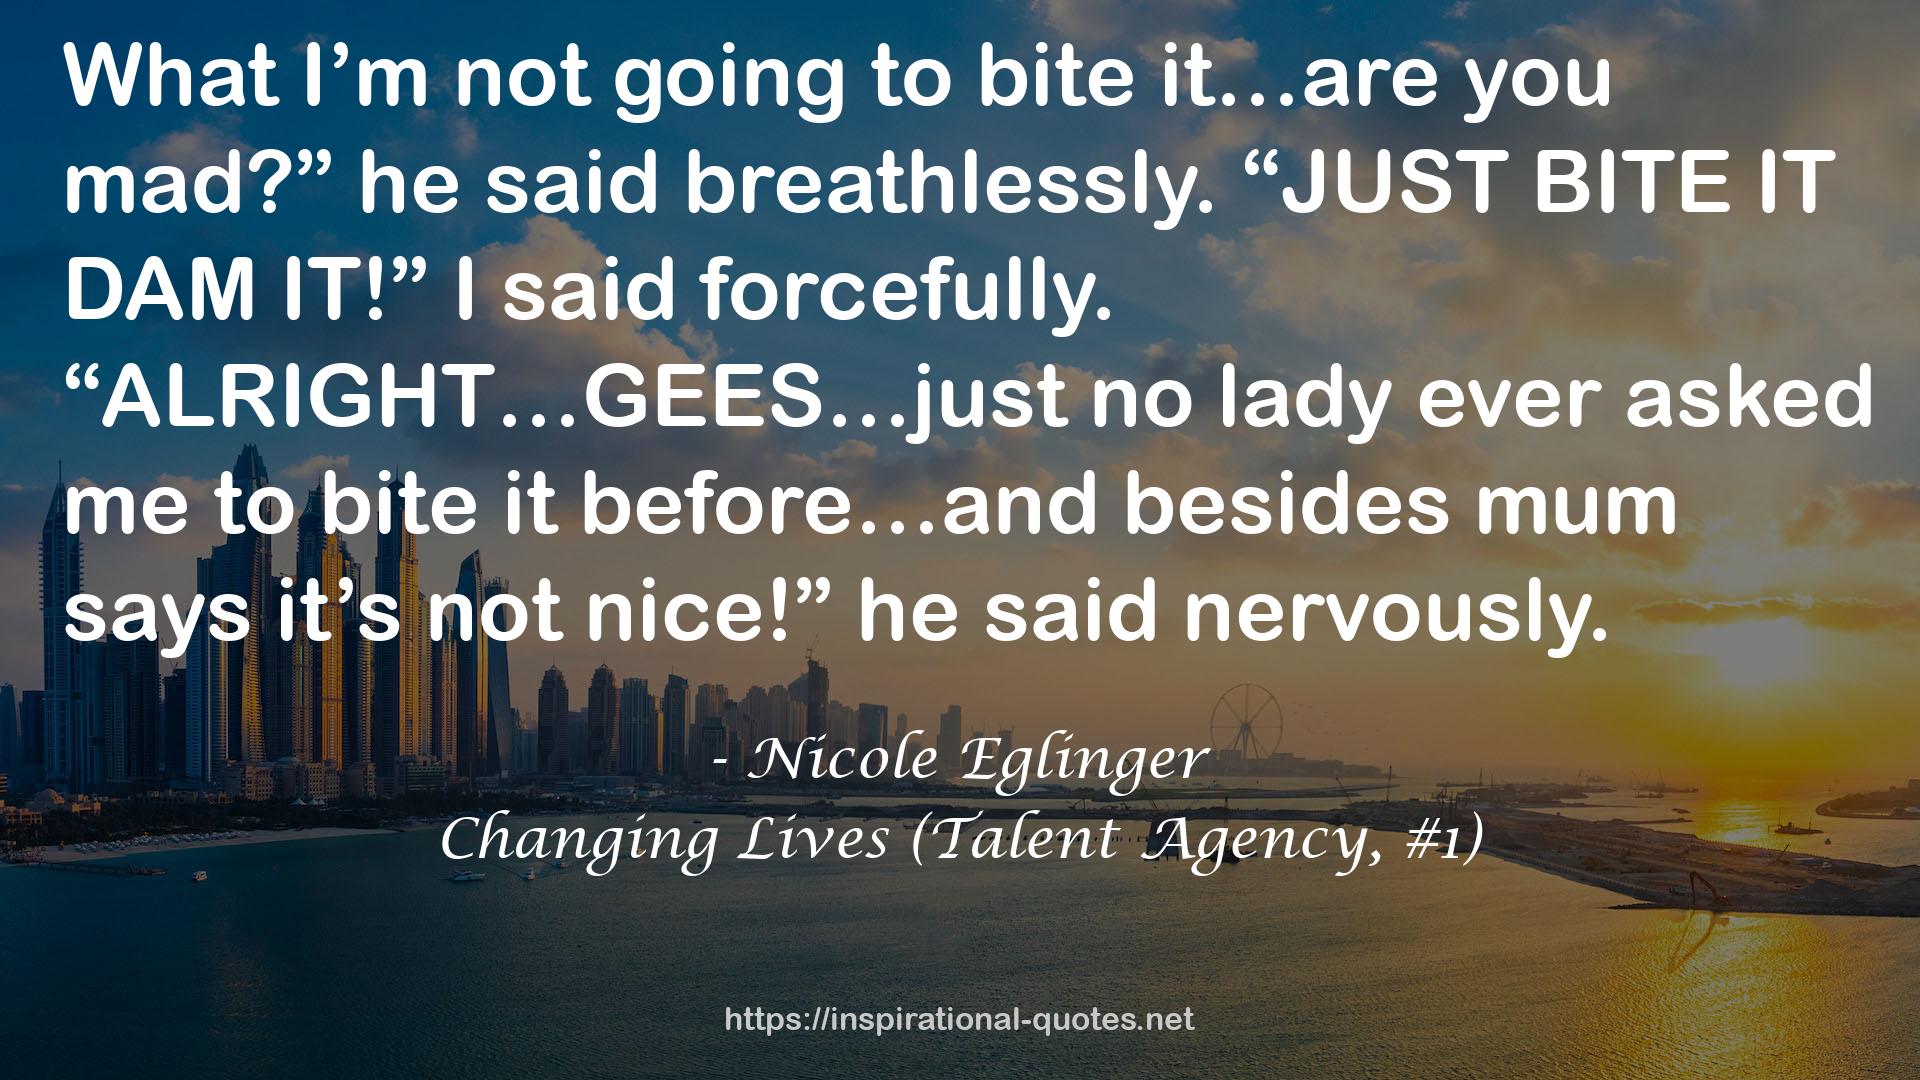 Changing Lives (Talent Agency, #1) QUOTES